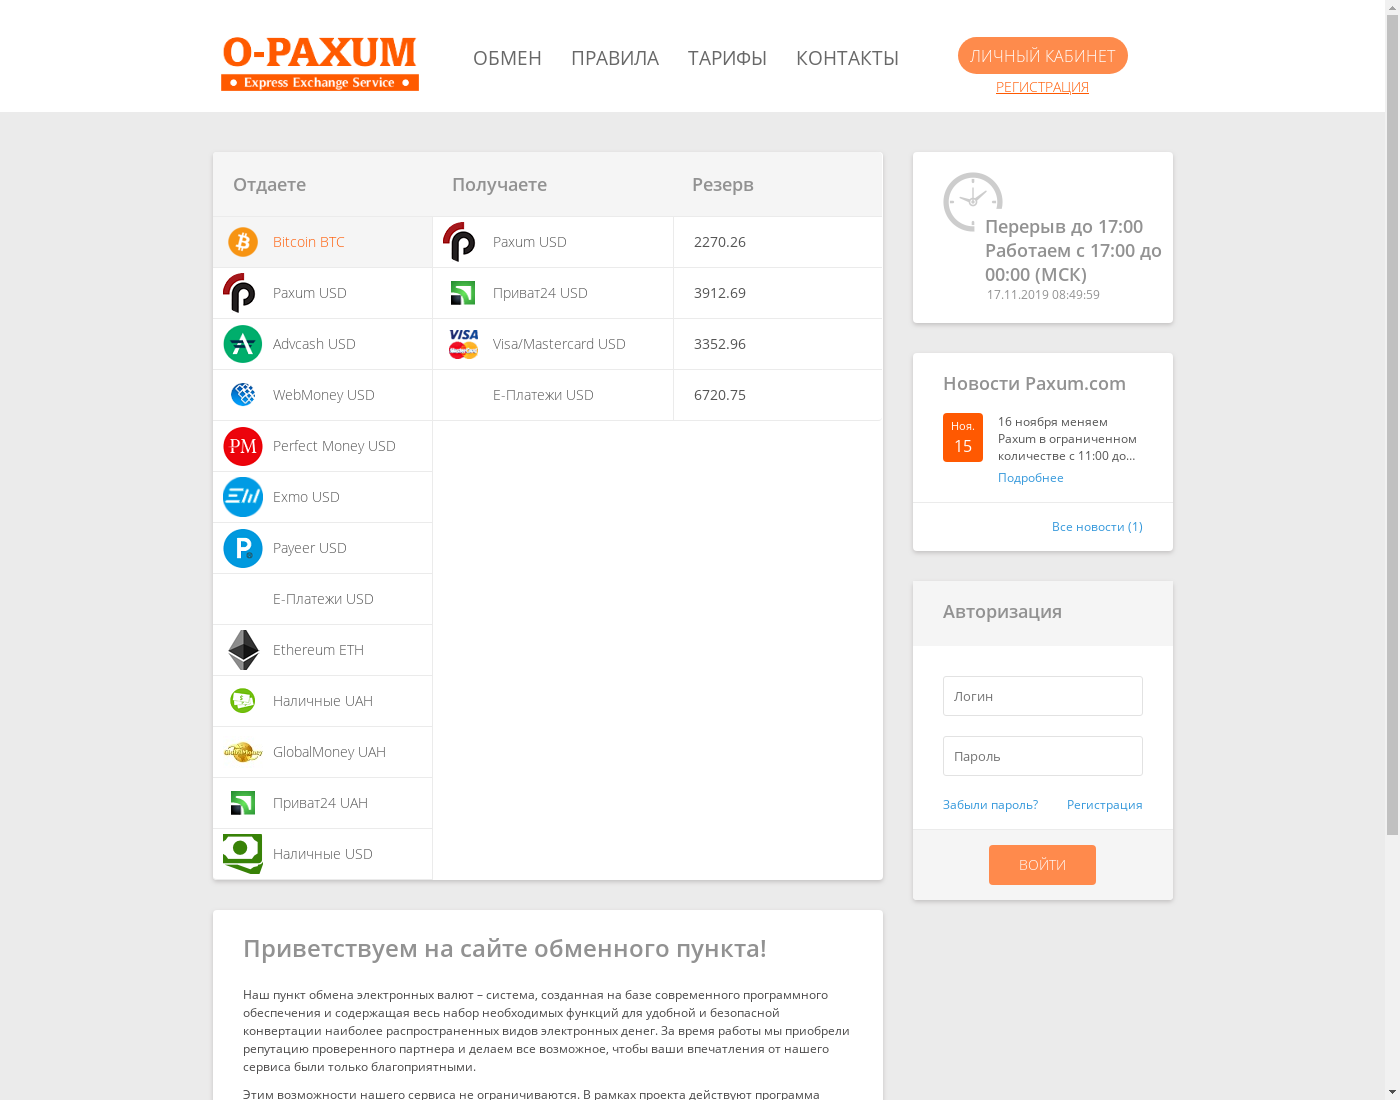 o-paxum user interface: the home page in English